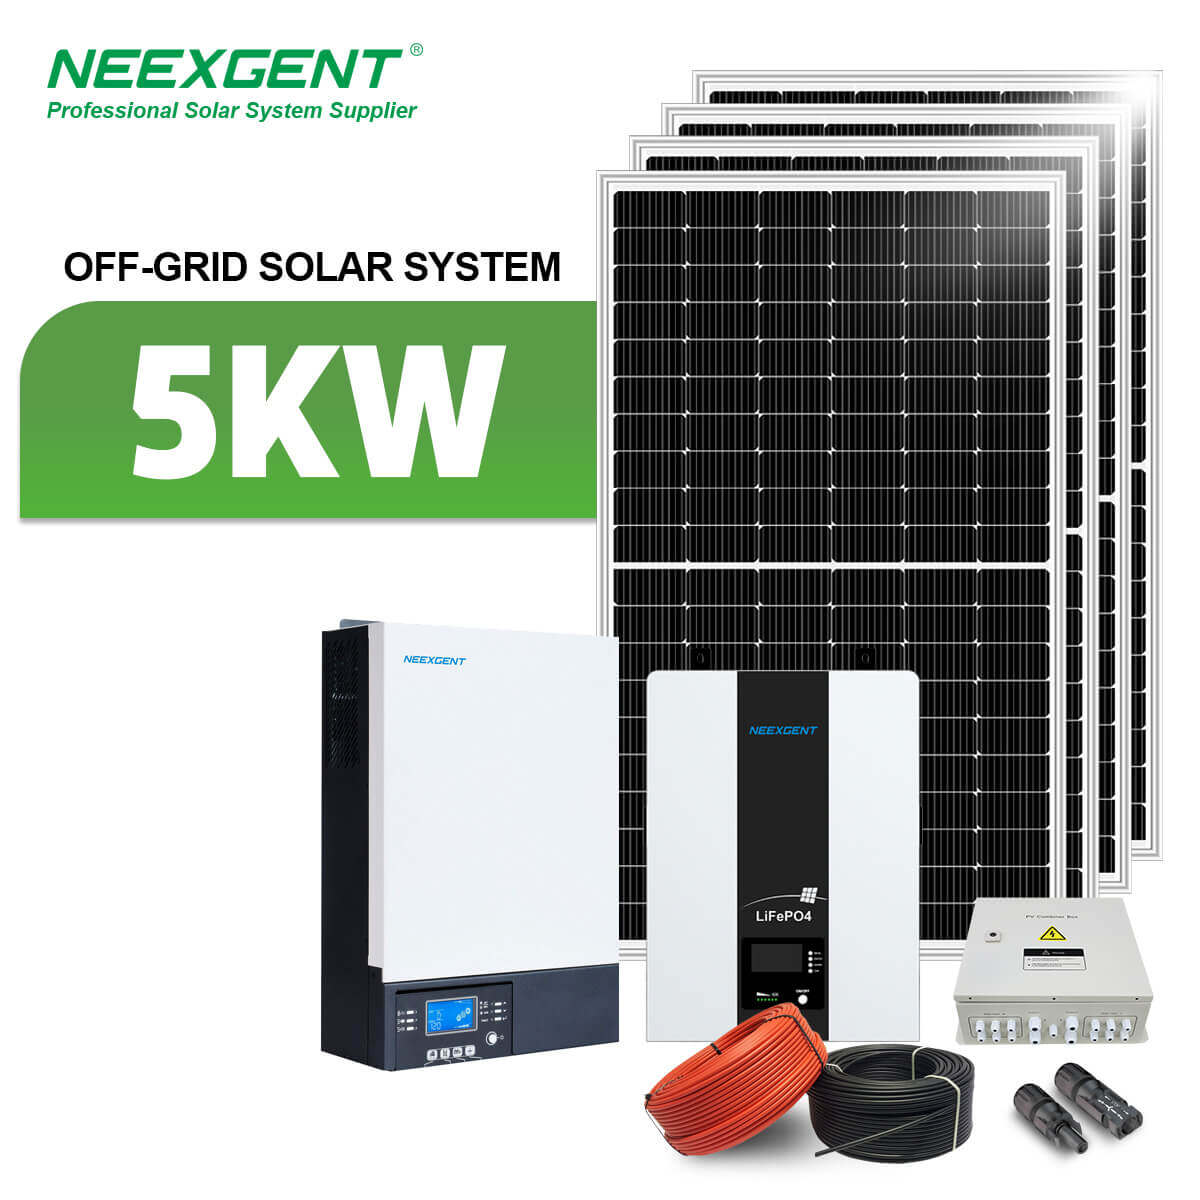 Neexgent 5kw off grid solar power panel system kit set for home